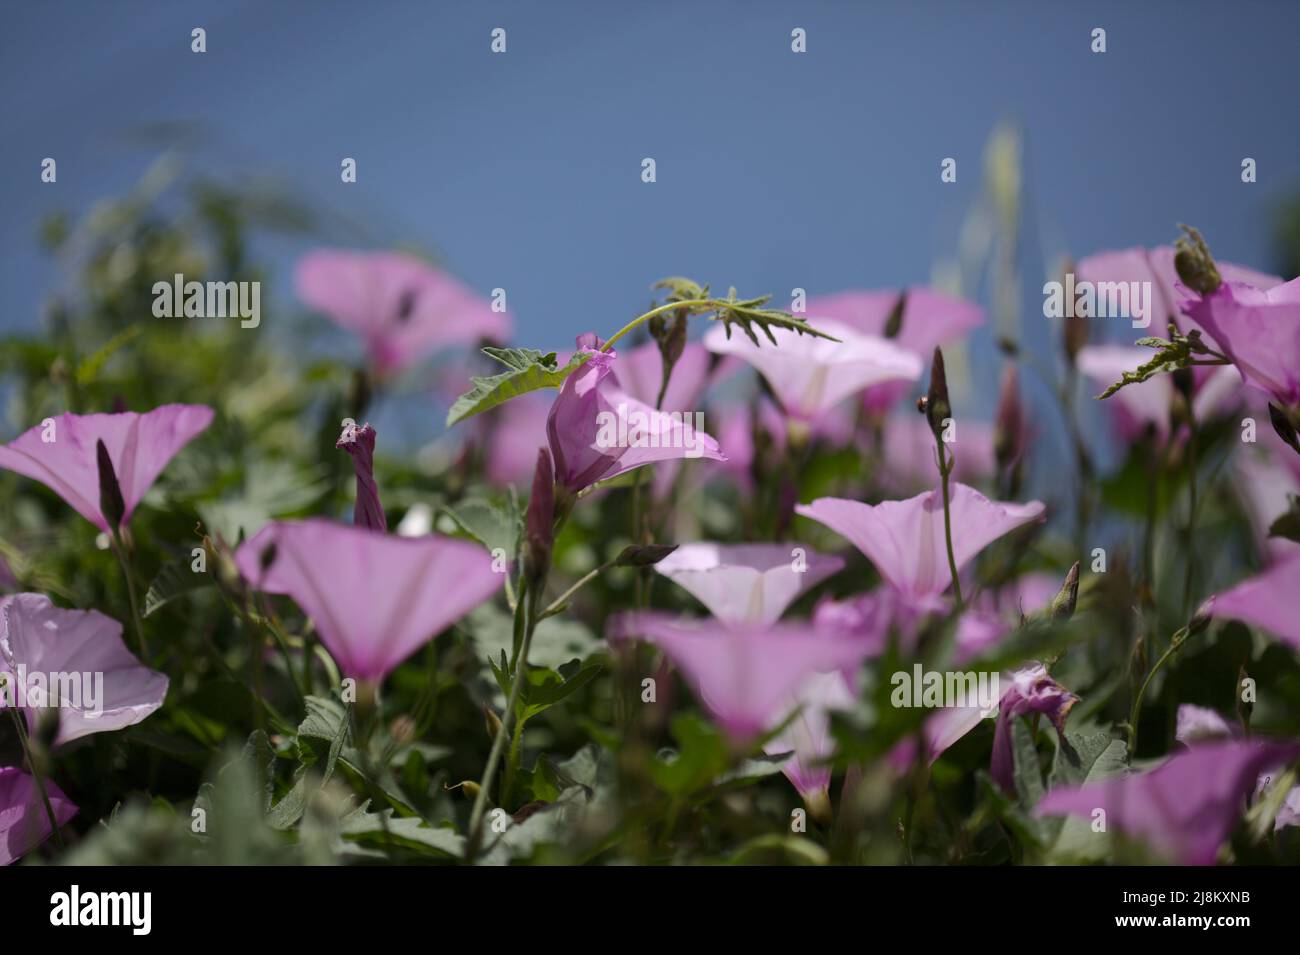 Flora of Gran Canaria - Convolvulus althaeoides, mallow bindweed, natural macro floral background Stock Photo